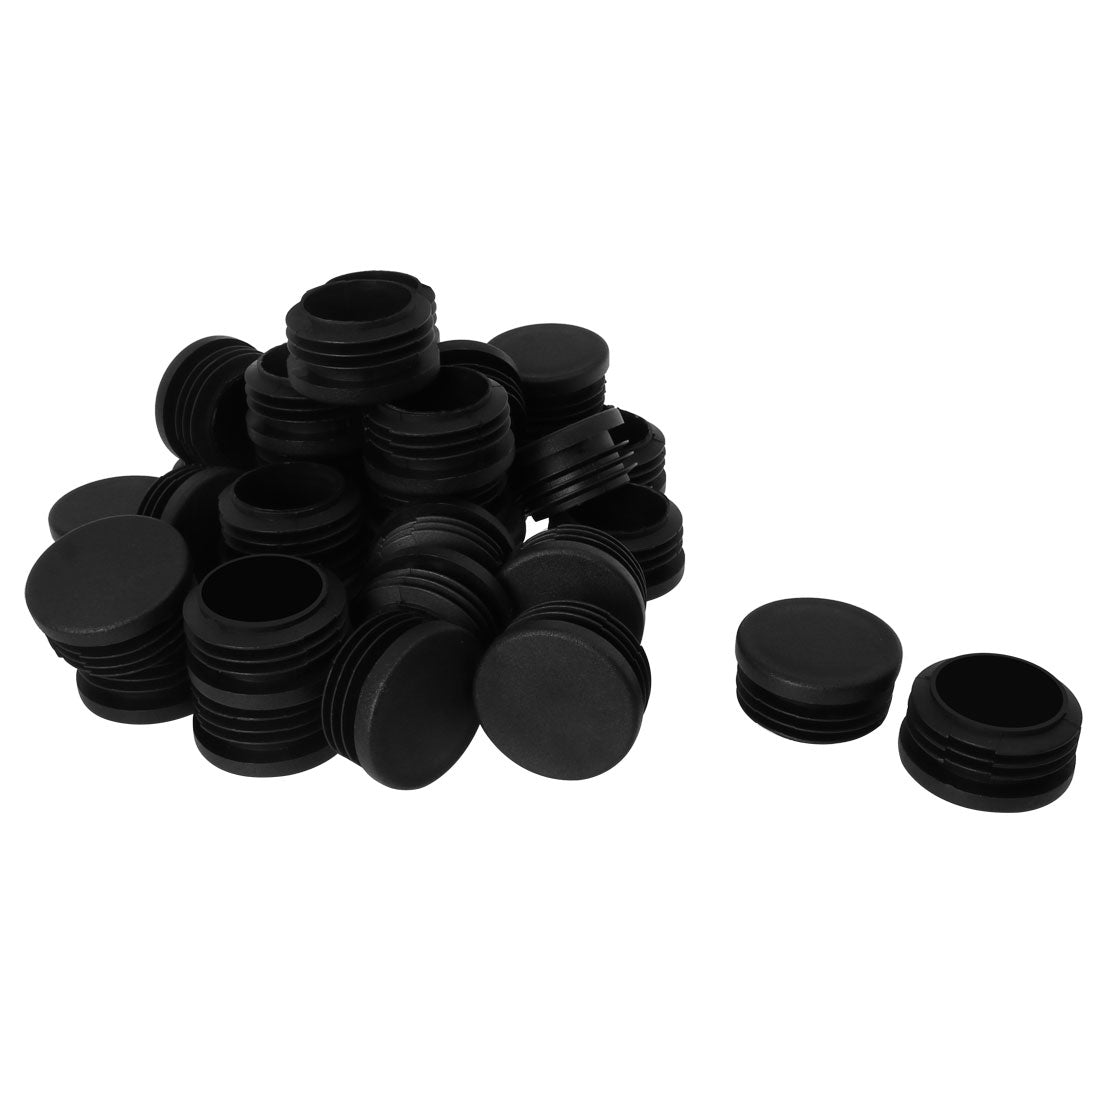 Uxcell Uxcell 7/8" 0.87" OD Plastic Round Tube Insert Glide End Cap Pad 34pcs 0.75"-0.83" Inner Dia for Furniture Porch Floor Prevent Noise